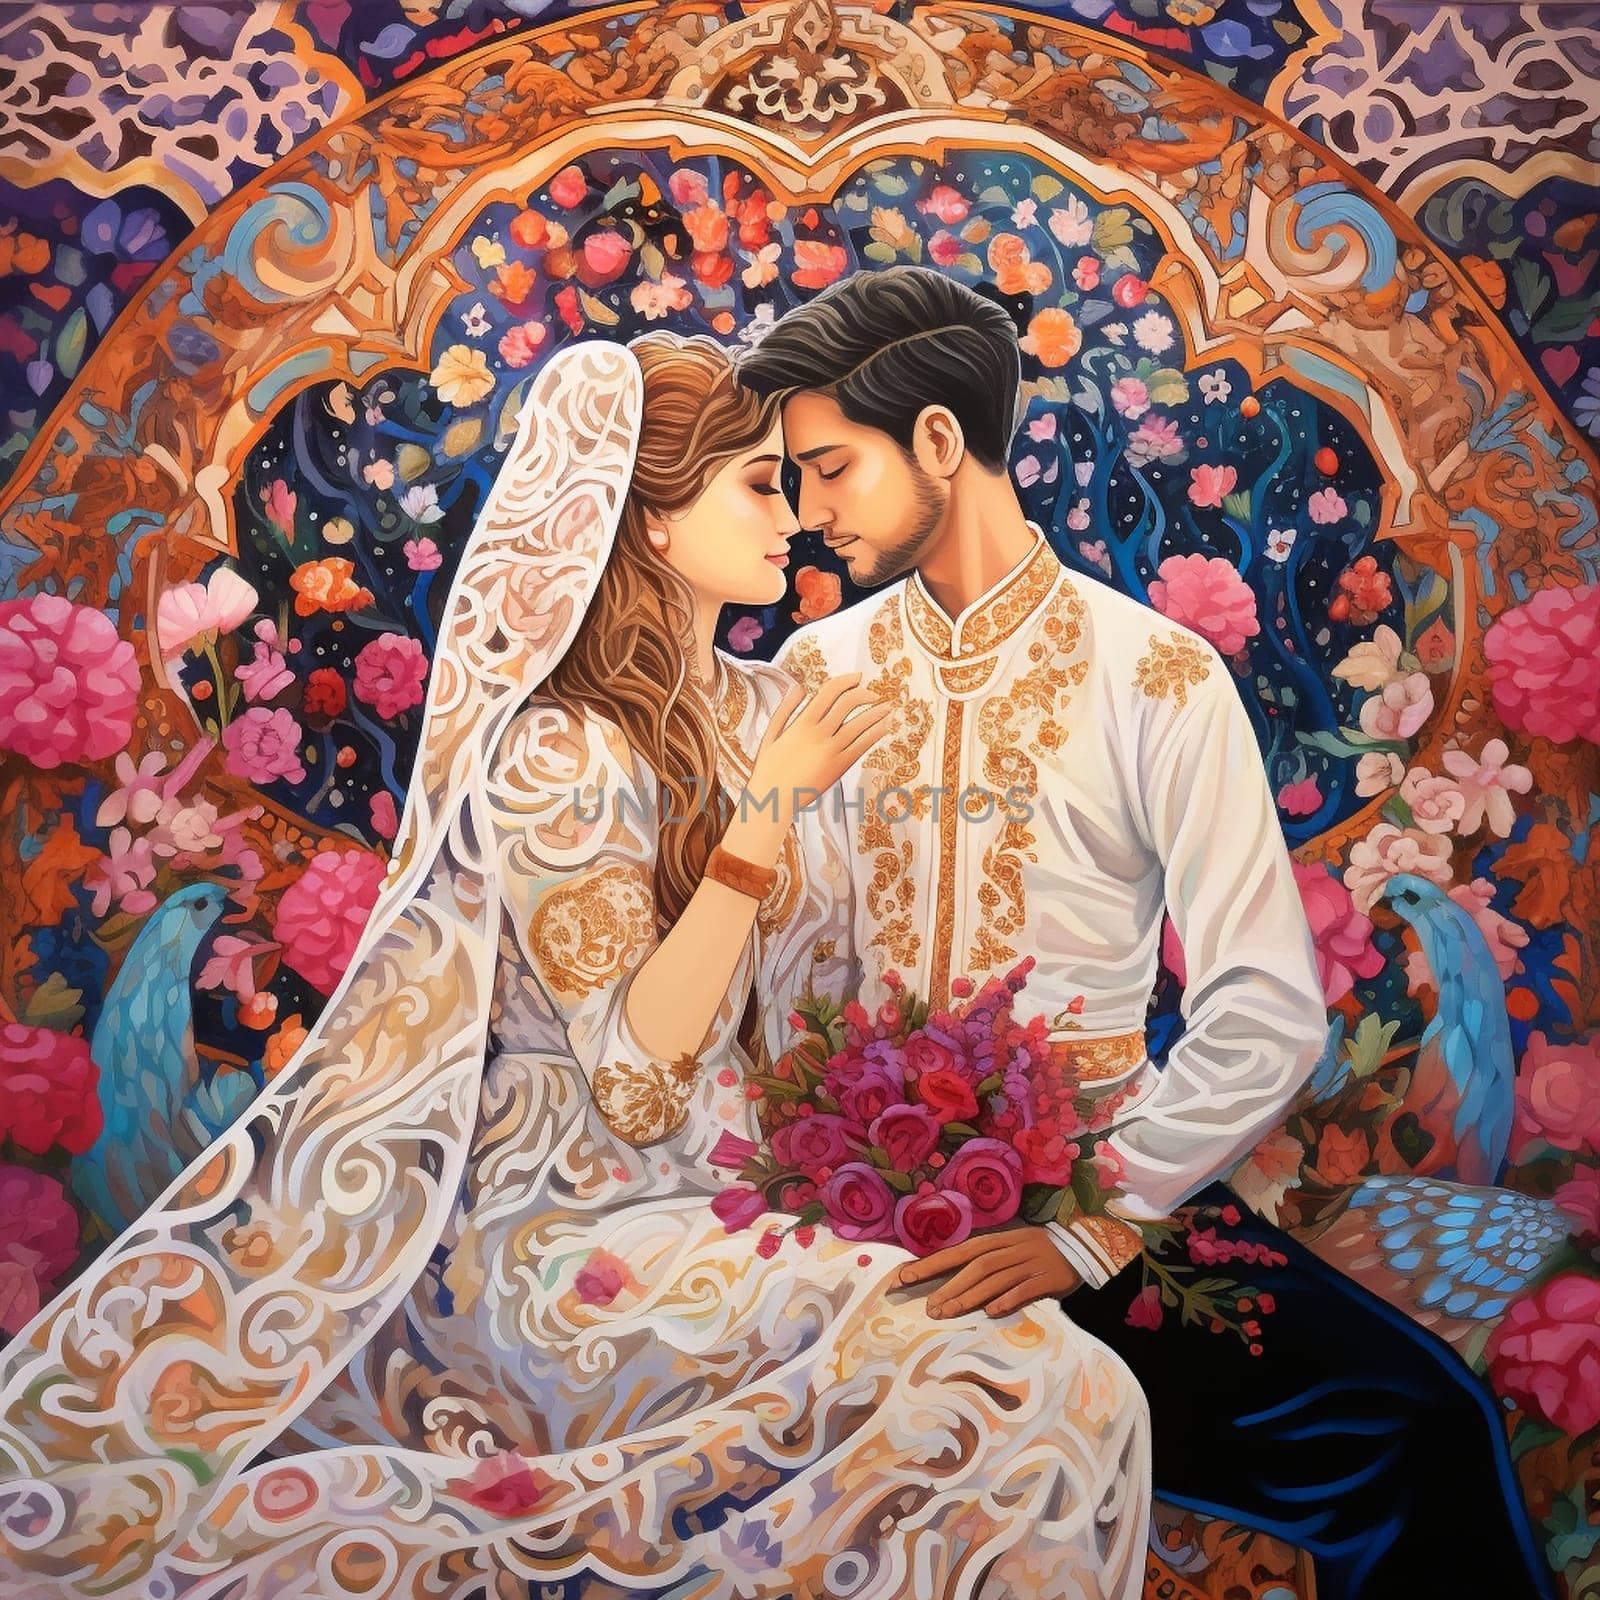 Capture the timeless beauty and significance of a traditional wedding vow exchange in front of an intricately designed tapestry that tells the unique love story of the couple. The tapestry features vibrant colors, delicate patterns, and meaningful symbols that represent their journey together. The art style is a blend of realism and dreamlike elements, with a touch of whimsy, creating a captivating visual narrative. The couple's eyes and expressions convey boundless love and commitment, evoking emotions of joy and romance. This image is perfect for illustrating the heartfelt moments of vow exchanges, resonating with viewers who appreciate authentic and profound connections, and inspiring a sense of everlasting love.